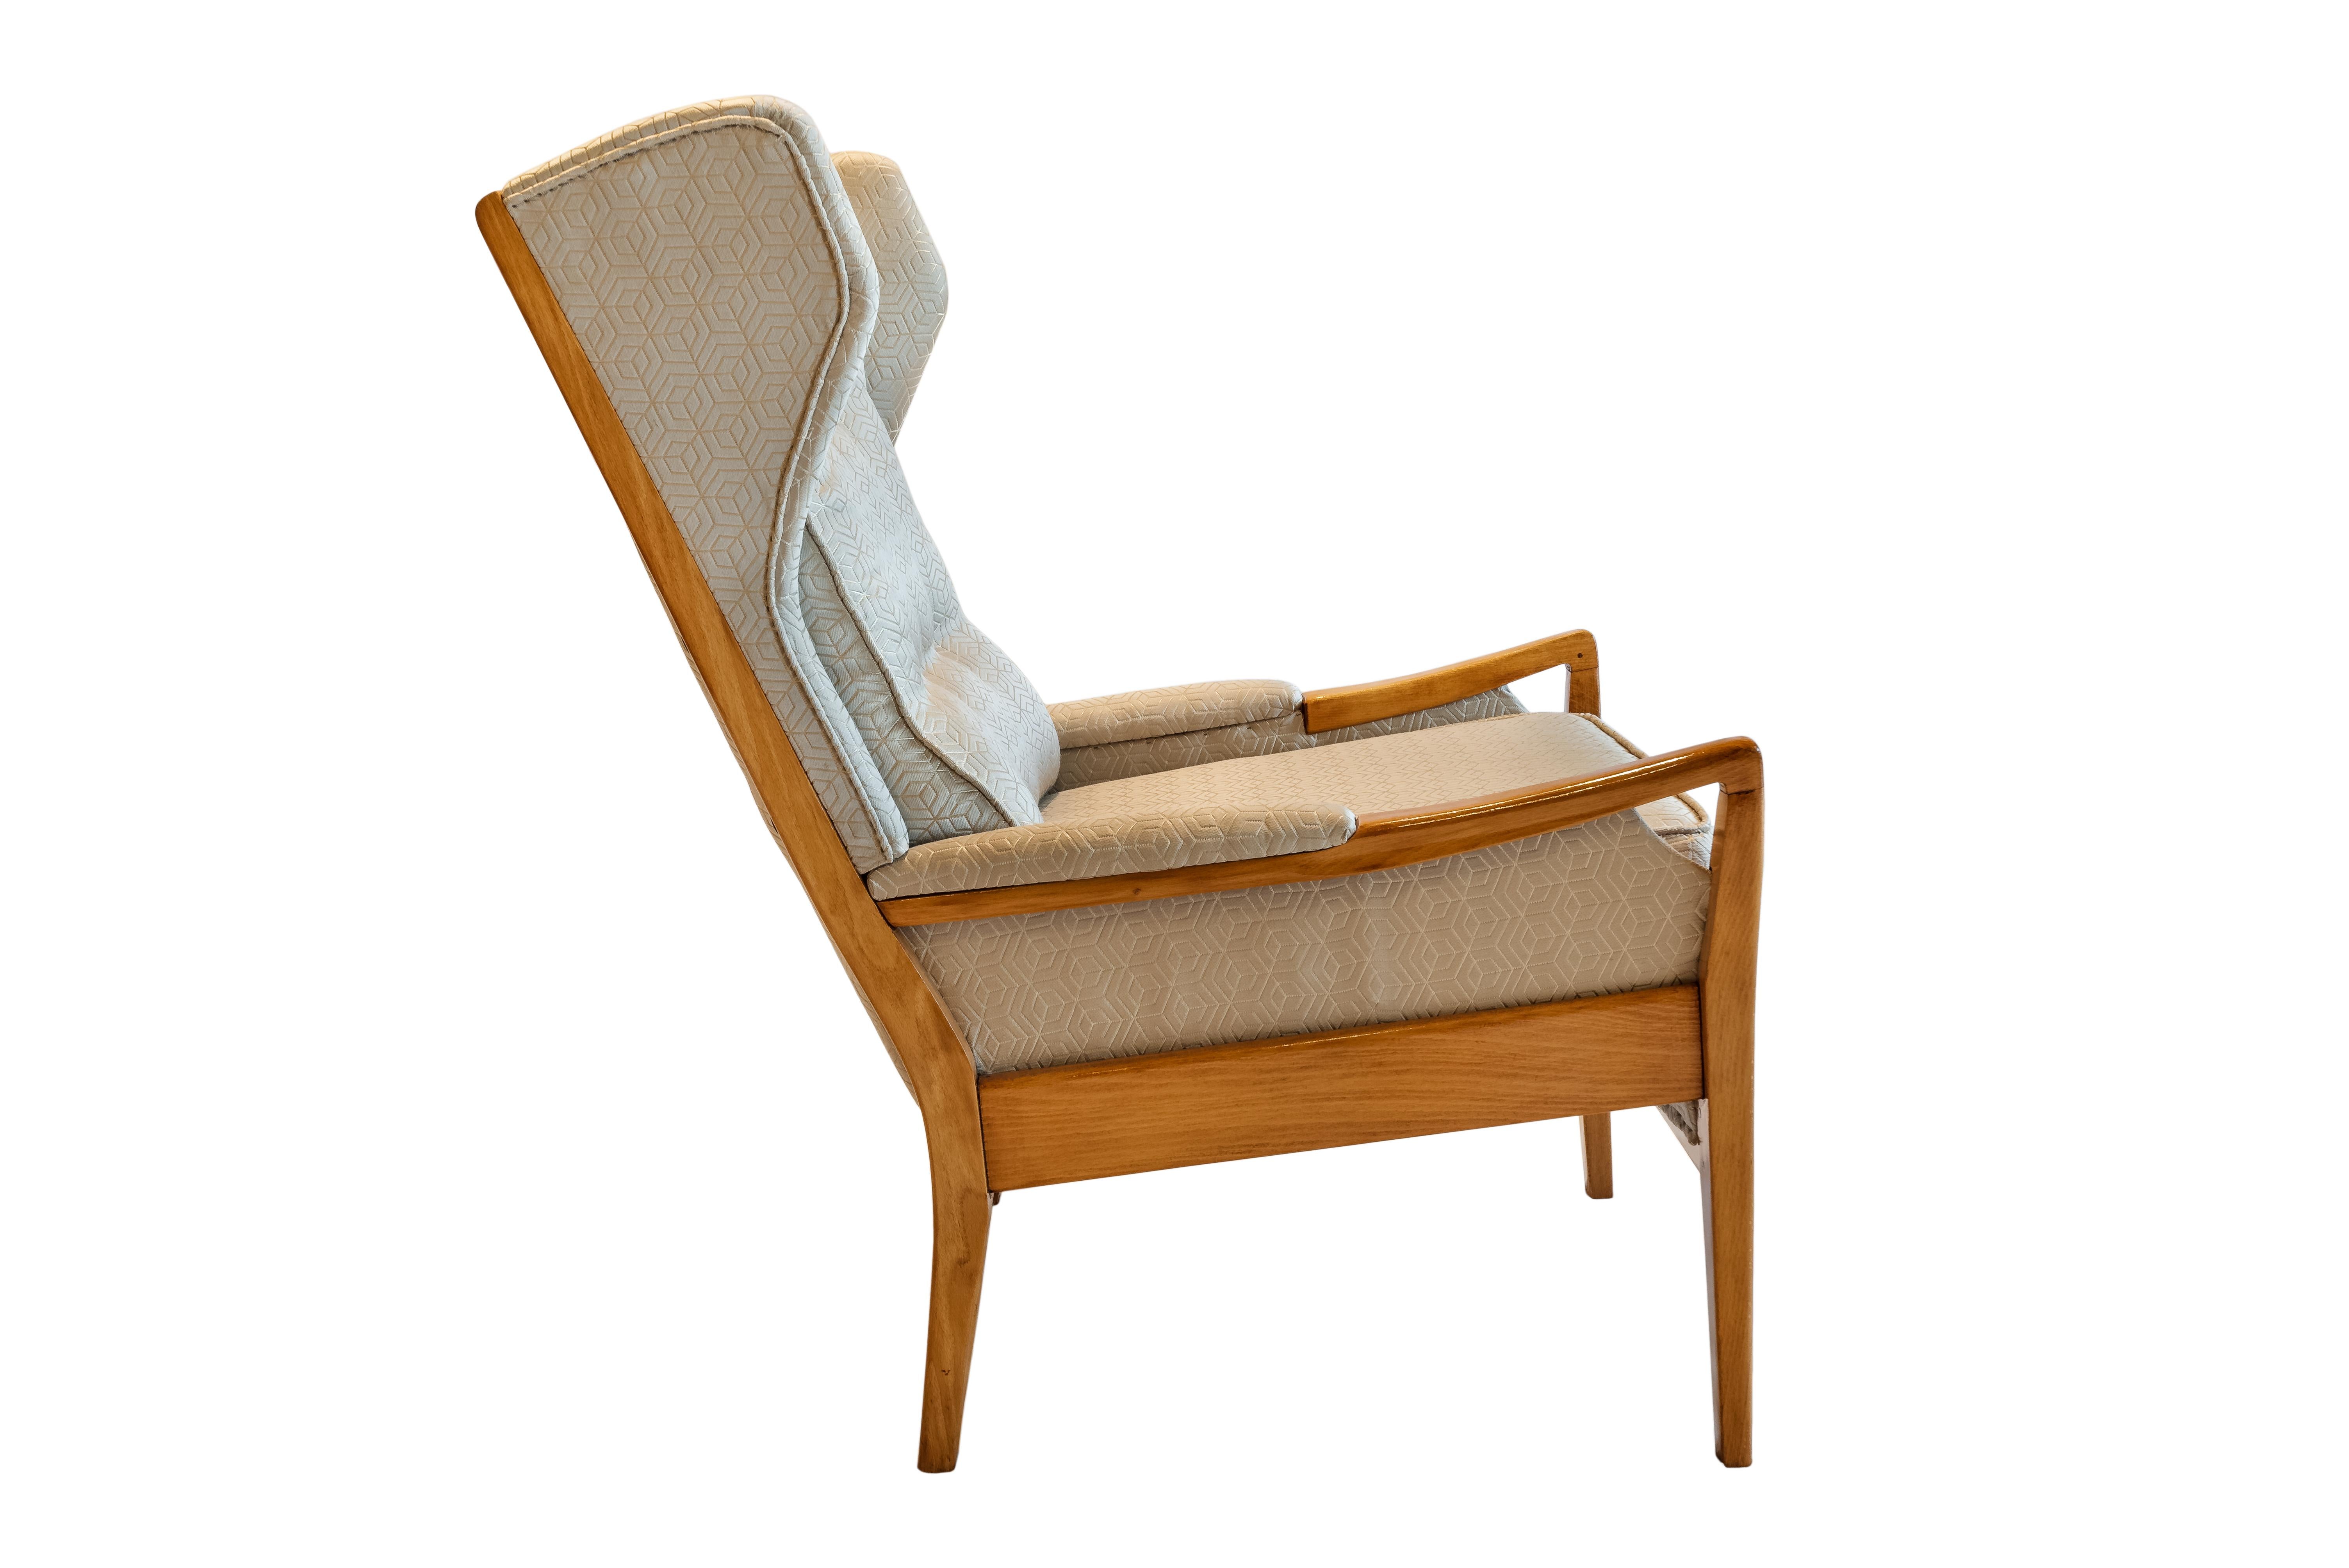 Mid-Century Modern pair of wingback teak chairs attributed to Arne Norell, circa 1958.

Super stylish and equally comfortable wingback, high back lounge chairs attributed to Swedish designer Arne Norell in the late 1950s. Raised on teak wood frames